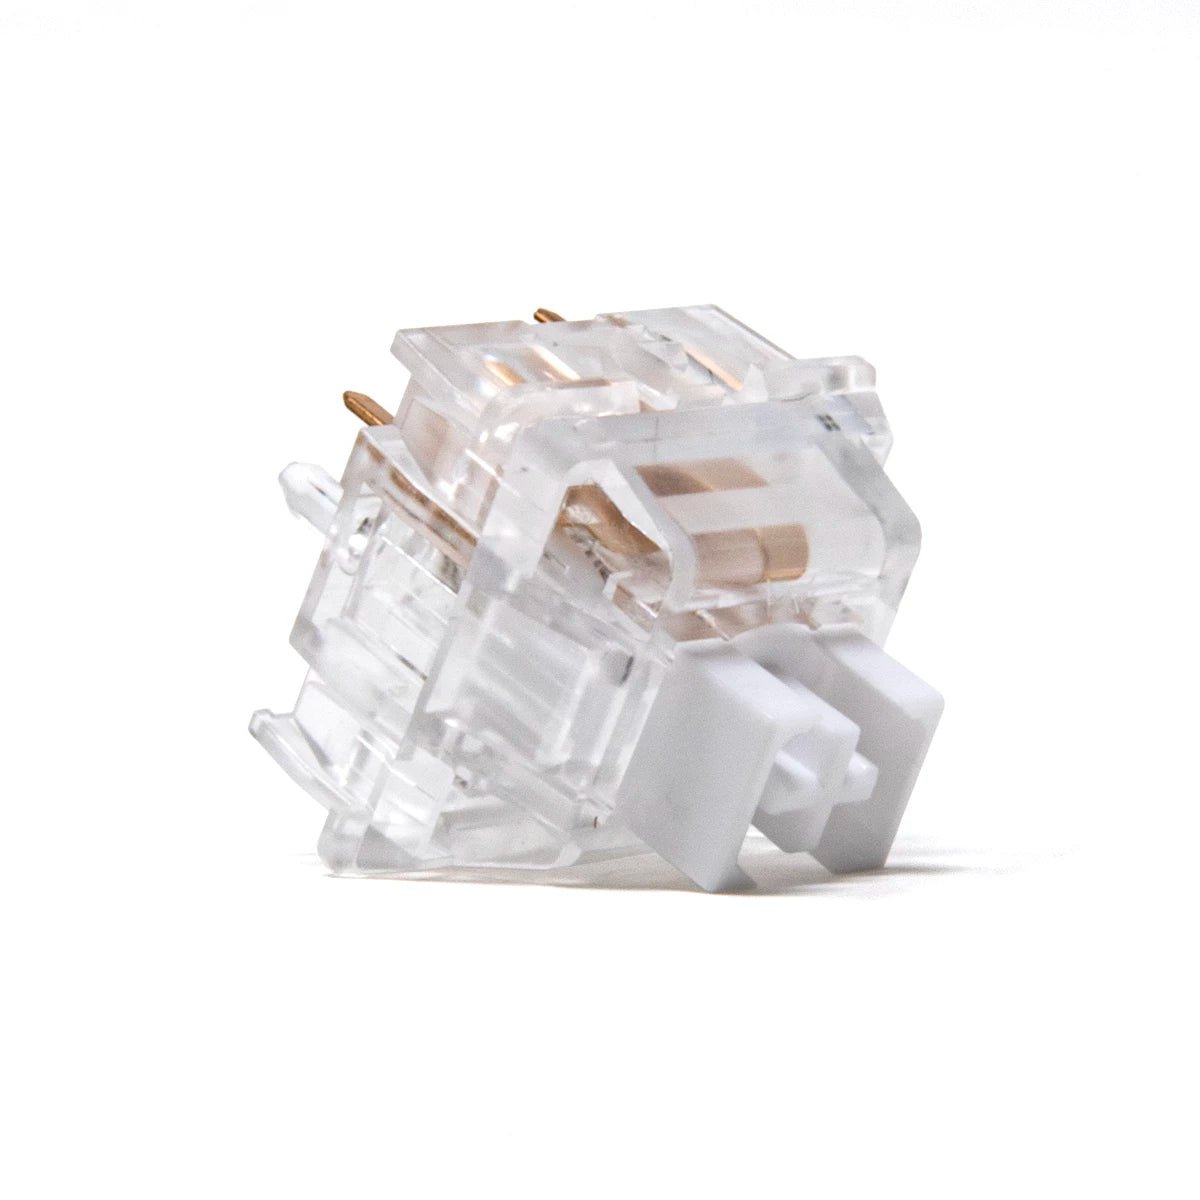 Wuque WS Aurora Clear Linear Switches - Divinikey